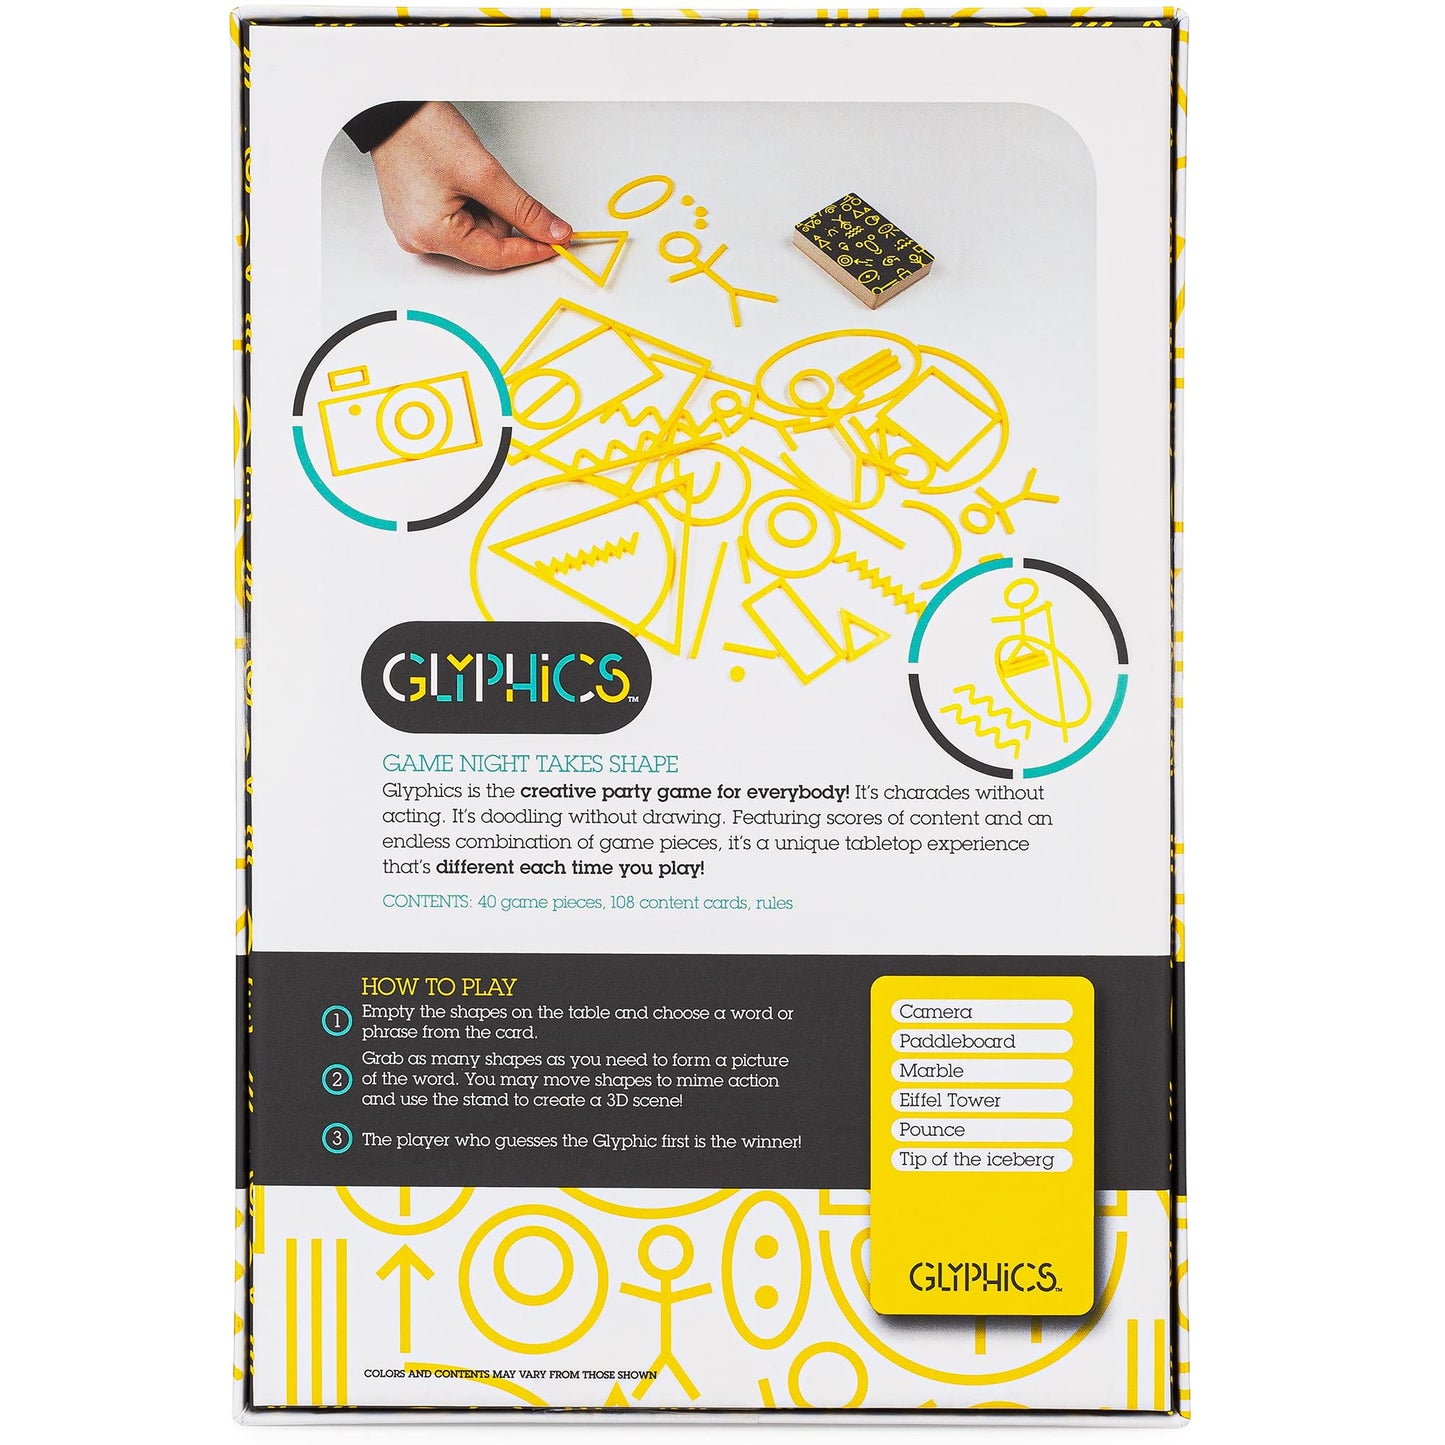 Big G Creative: Glyphics, Creative Party Game for Everybody, Charades Without Acting, Doodling Without Drawing, Unique Tabletop Experience, Different Each Time You Play, Easy to Learn, Ages 10 and up